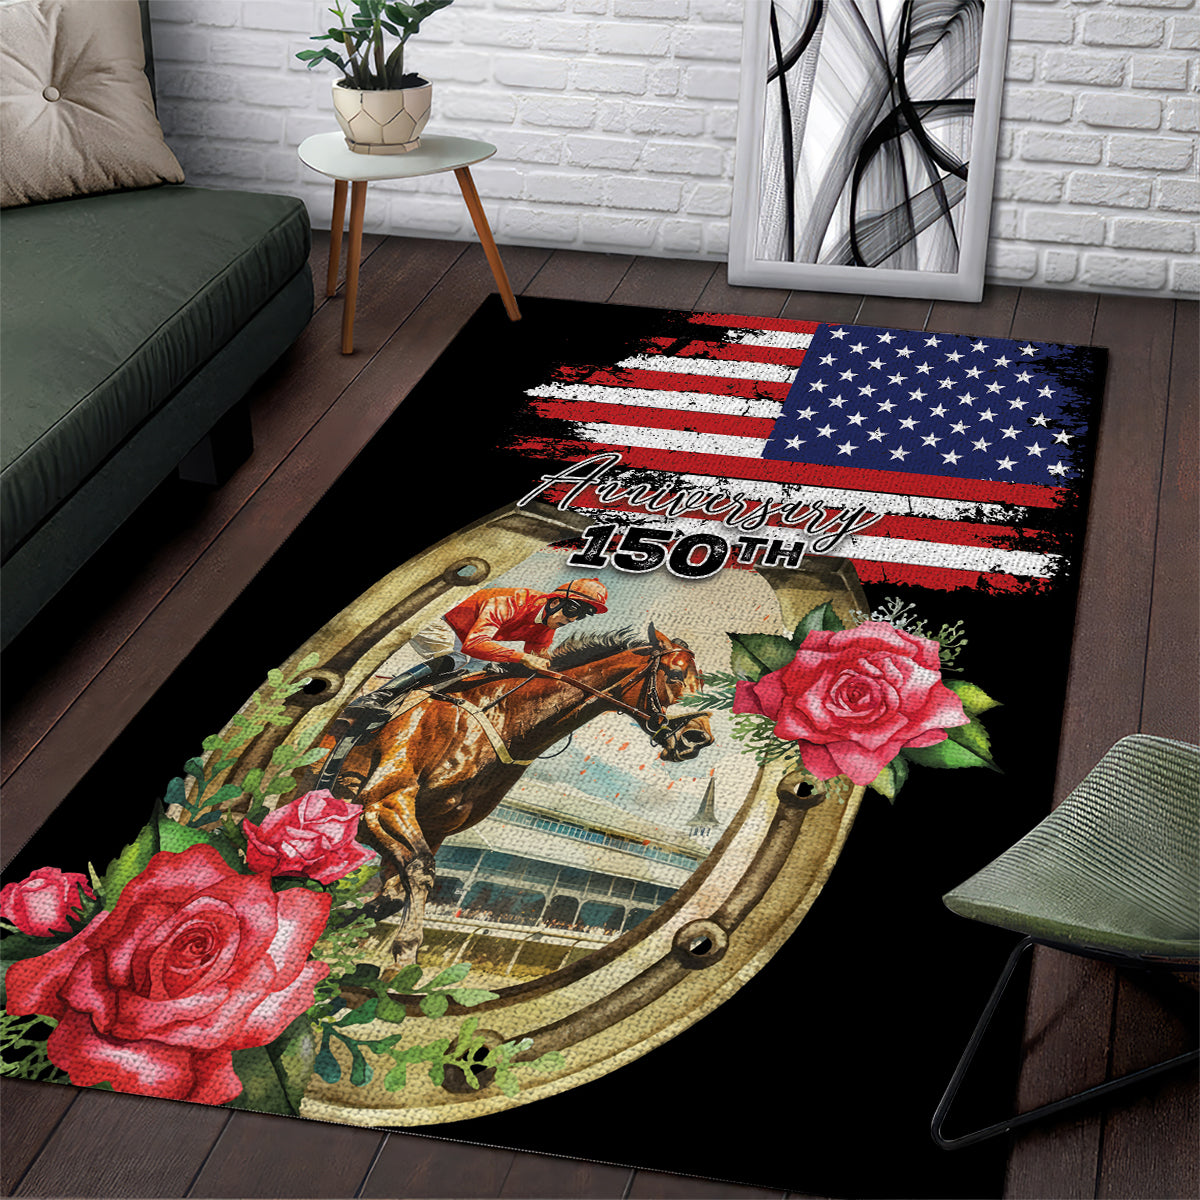 Kentucky Race For Rose 150th Area Rug Horseshoe With American Flag Vintage Style